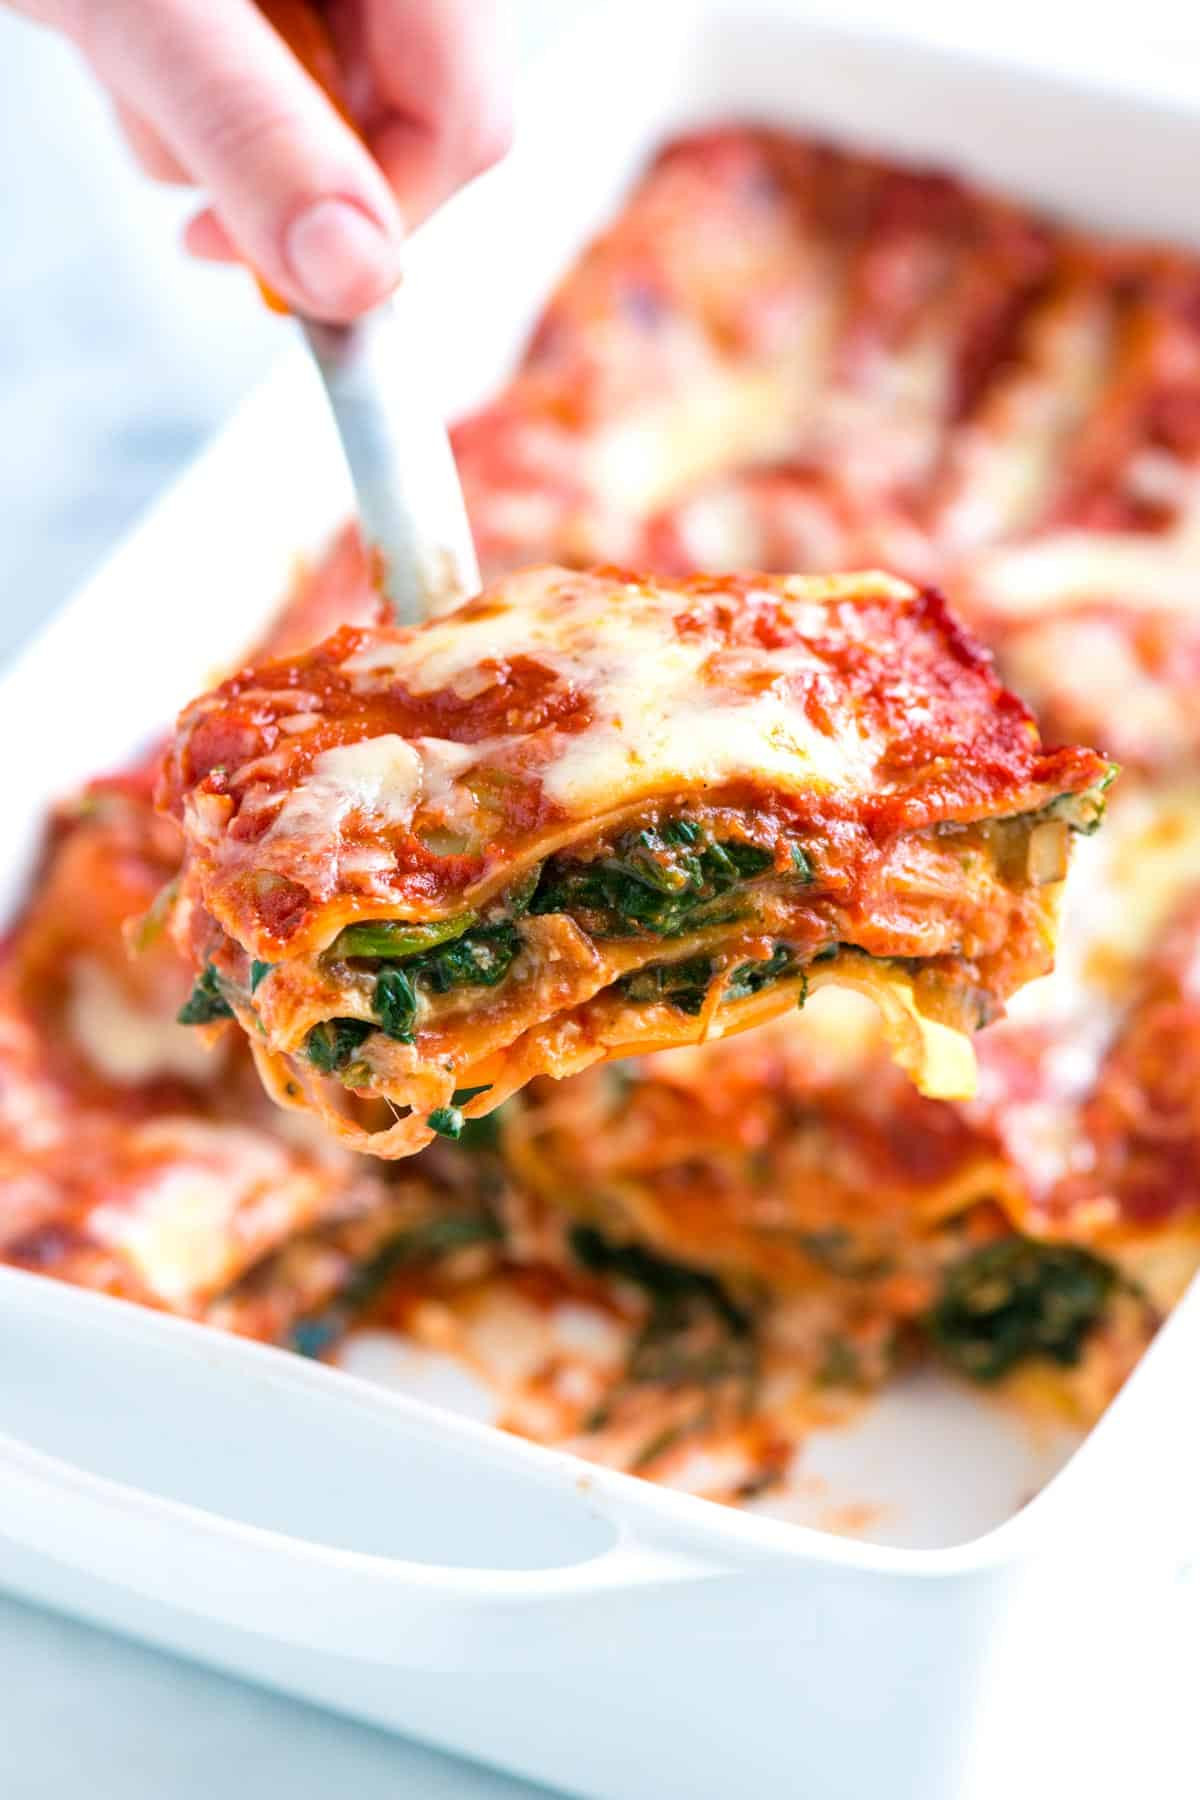 Healthy Lasagna Recipes the Best Ideas for Healthier Spinach Lasagna Recipe with Mushrooms